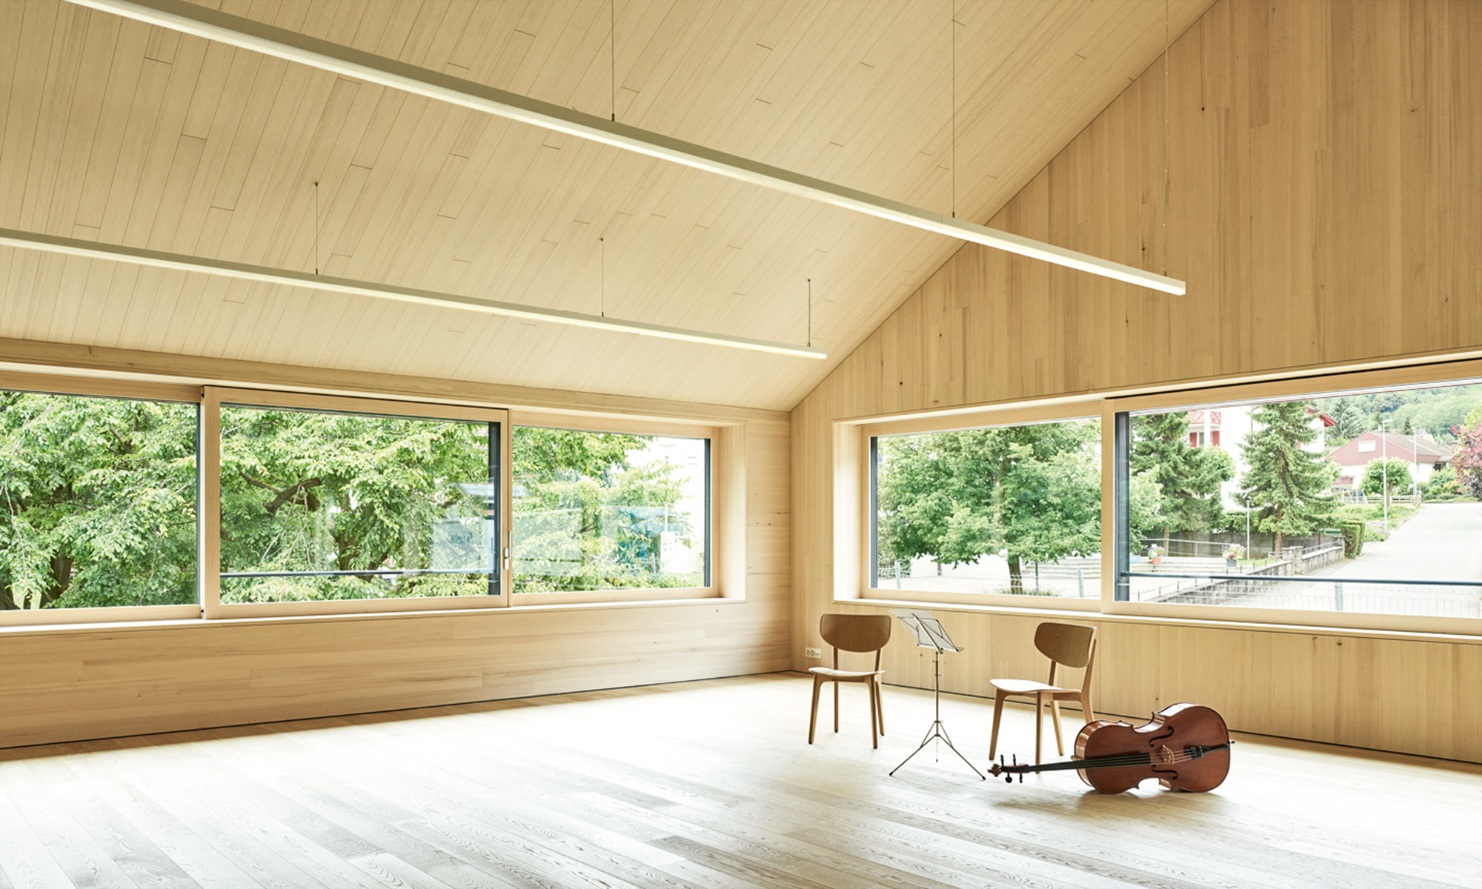 Bright classroom with interior finishing in timber and musical instruments